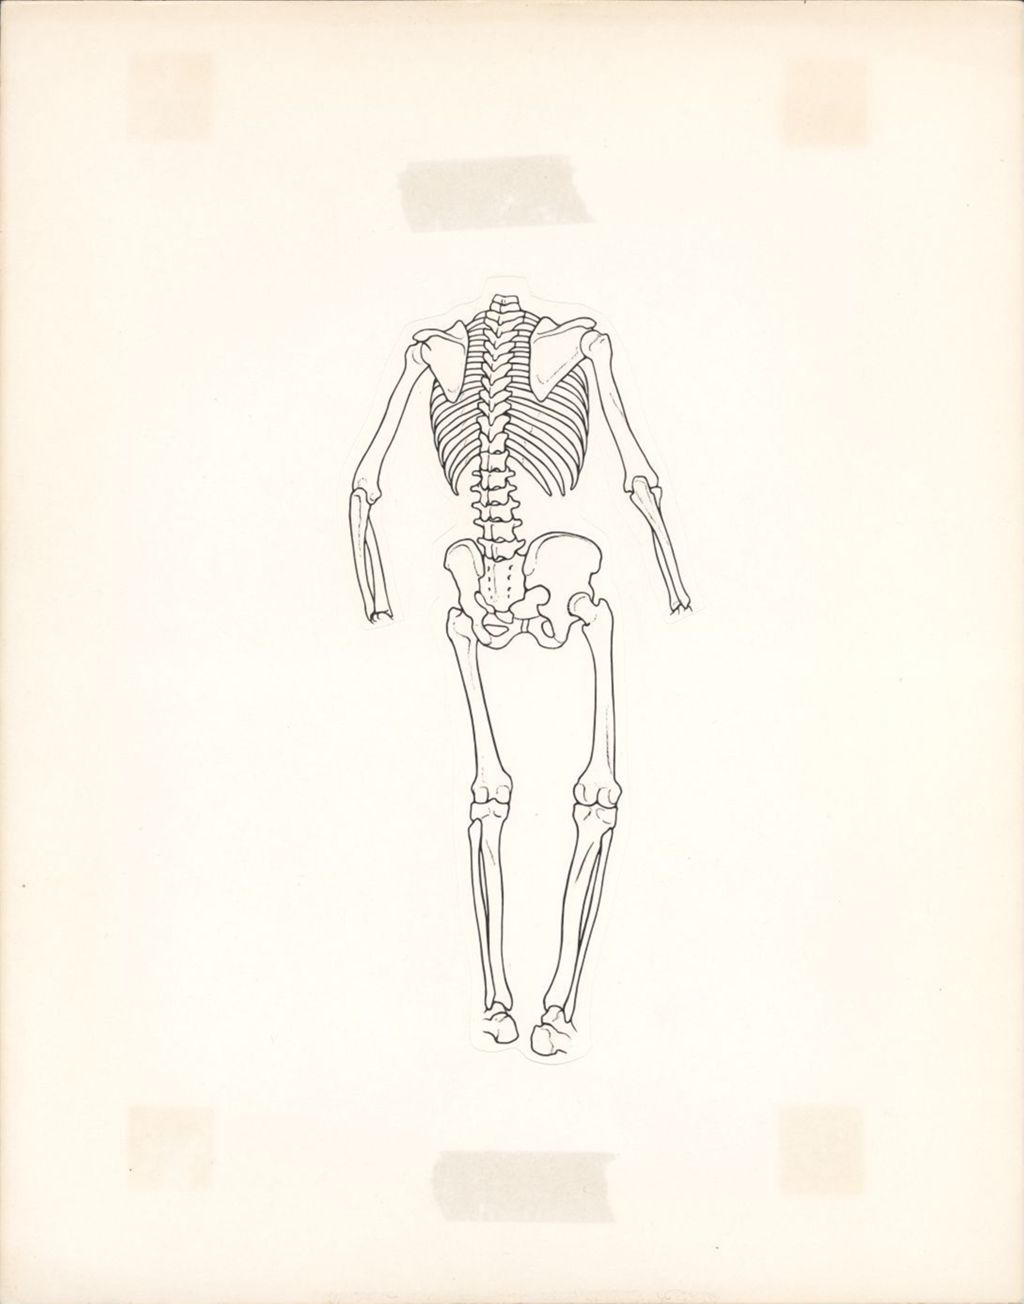 Artwork of posterior view of skeleton, missing hands, feet, and head